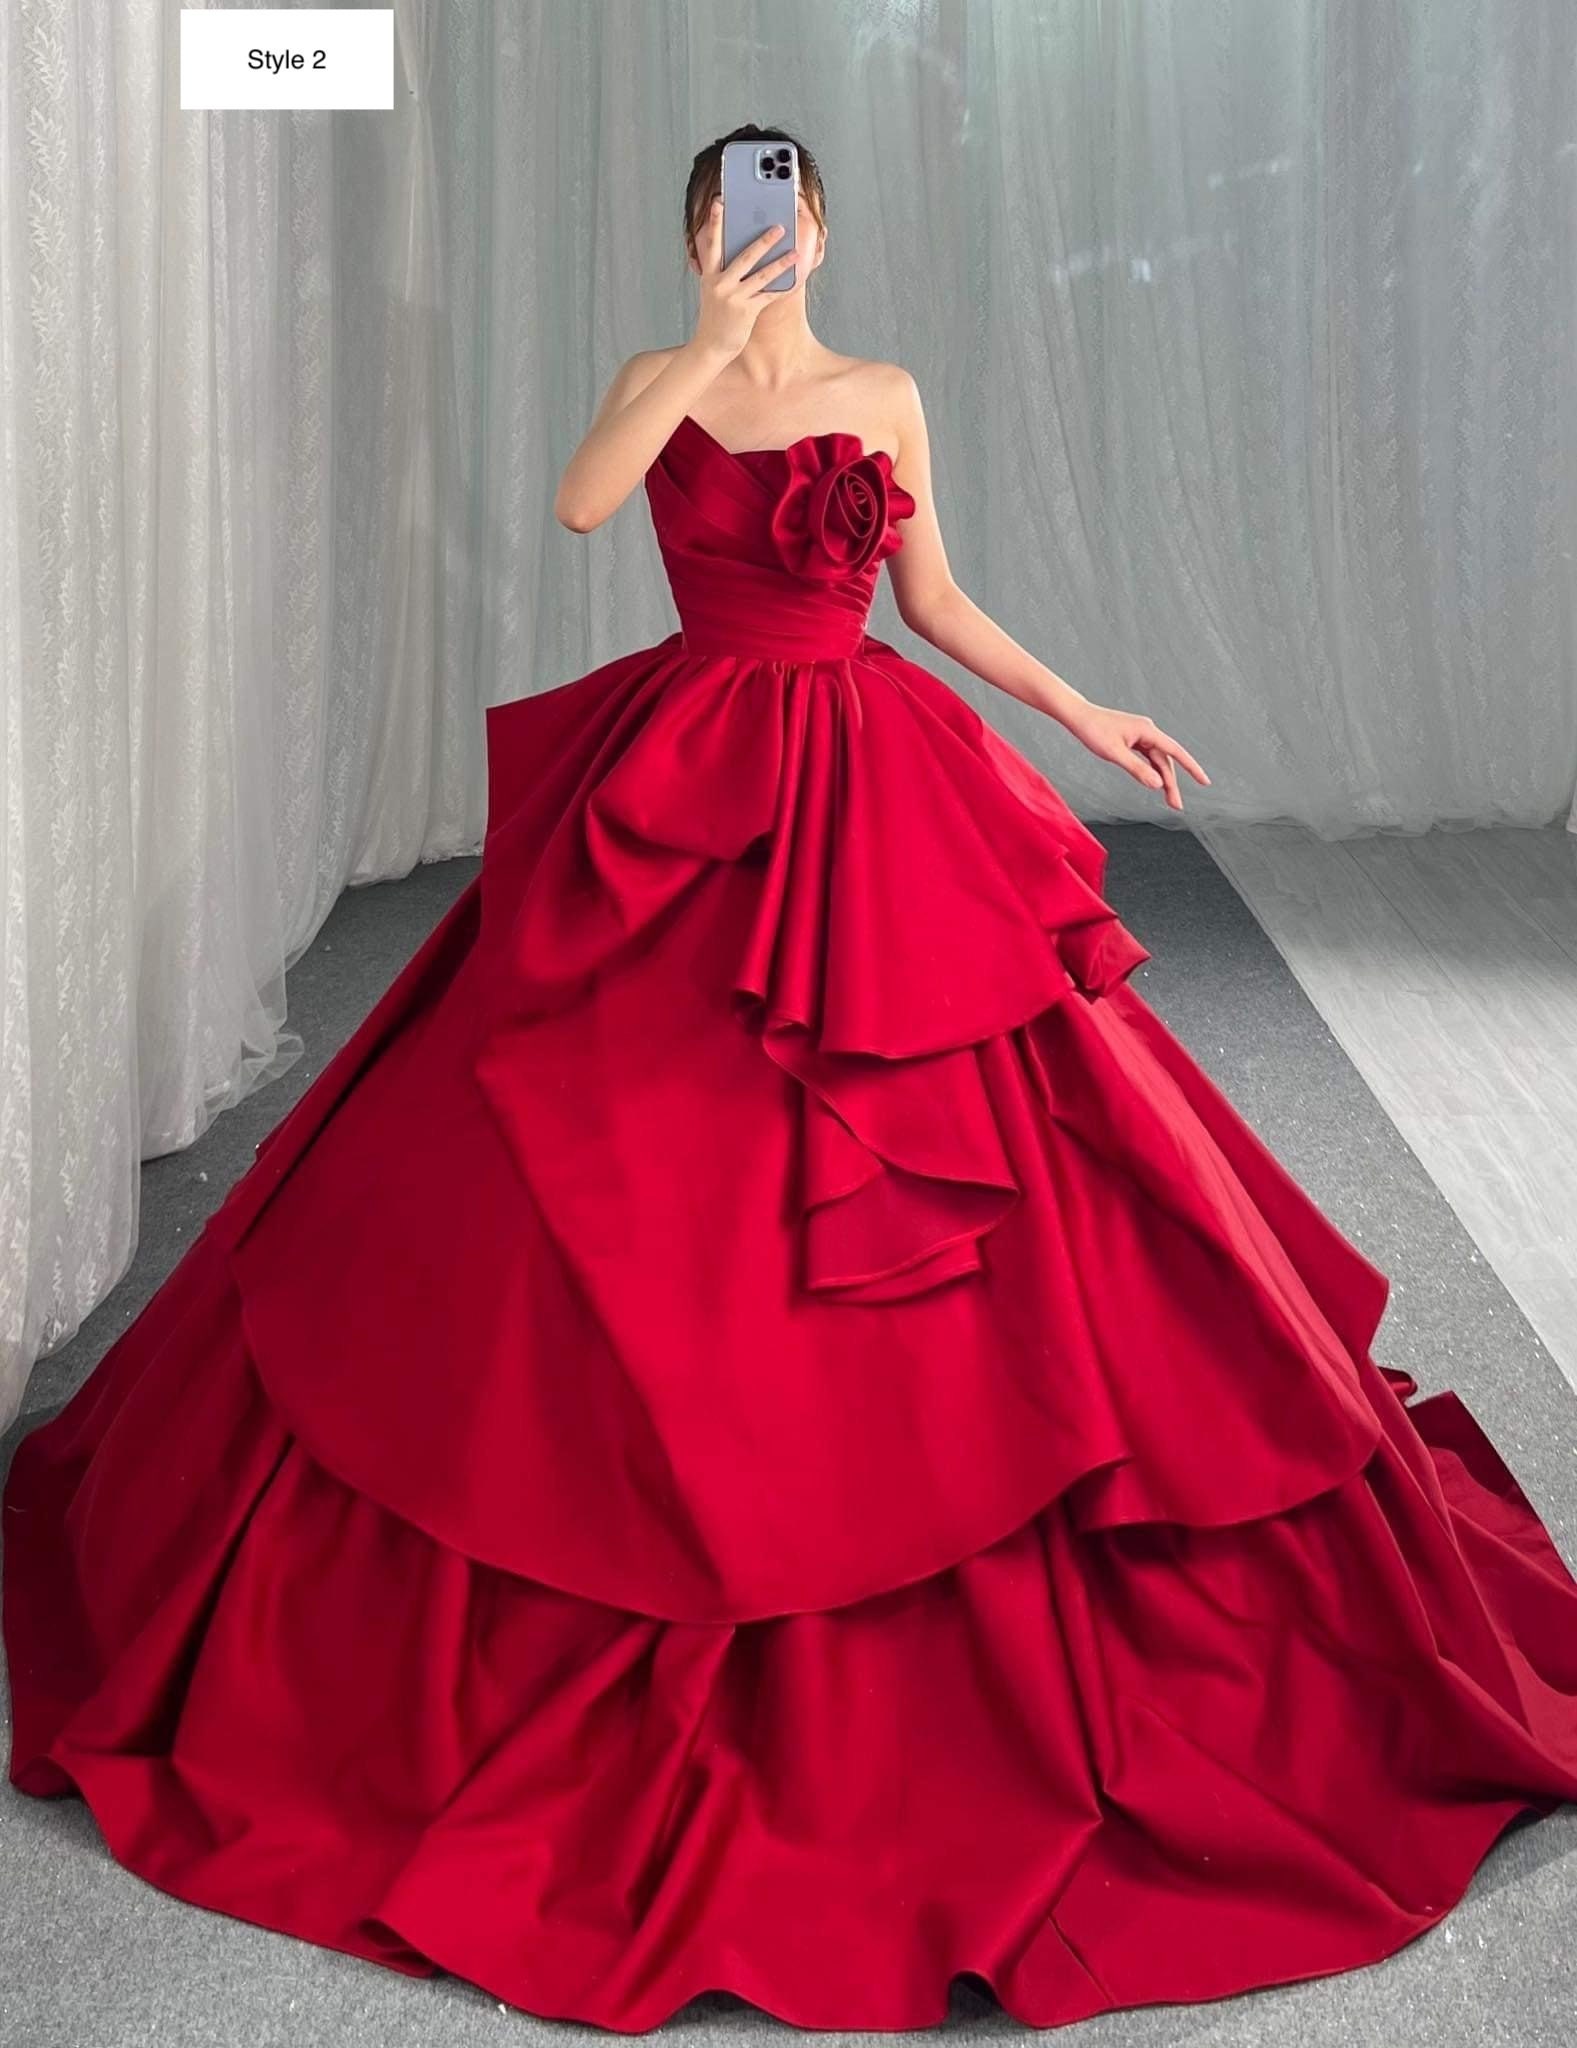 NNJXD Girls Ball Gown Wedding Princess Bridesmaid Party Prom Birthday Dress  for Kids Size(130) 6-7 Years Red : Amazon.co.uk: Fashion